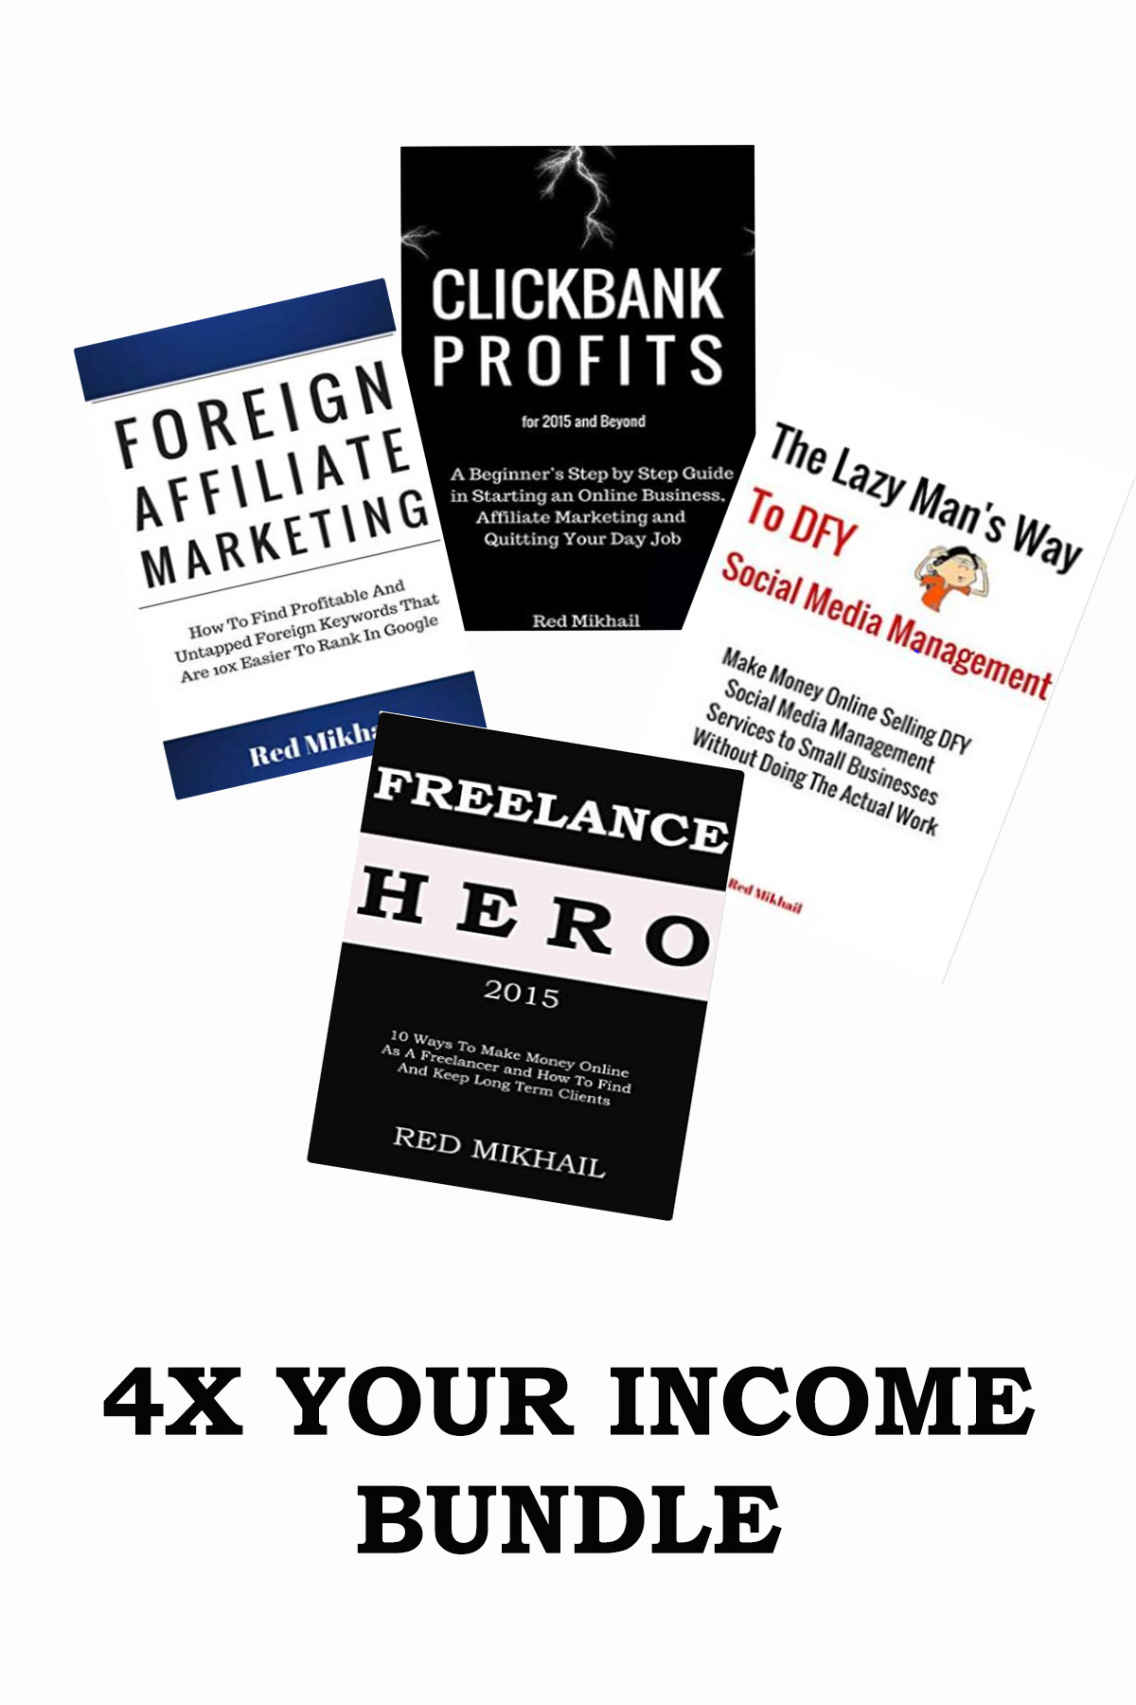 4x Your Income - Home Based Business Bundle: CLICKBANK PROFITS - FREELANCE HERO - FOREIGN AFFILIATE MARKETING & DFY SOCIAL MEDIA MANAGEMENT